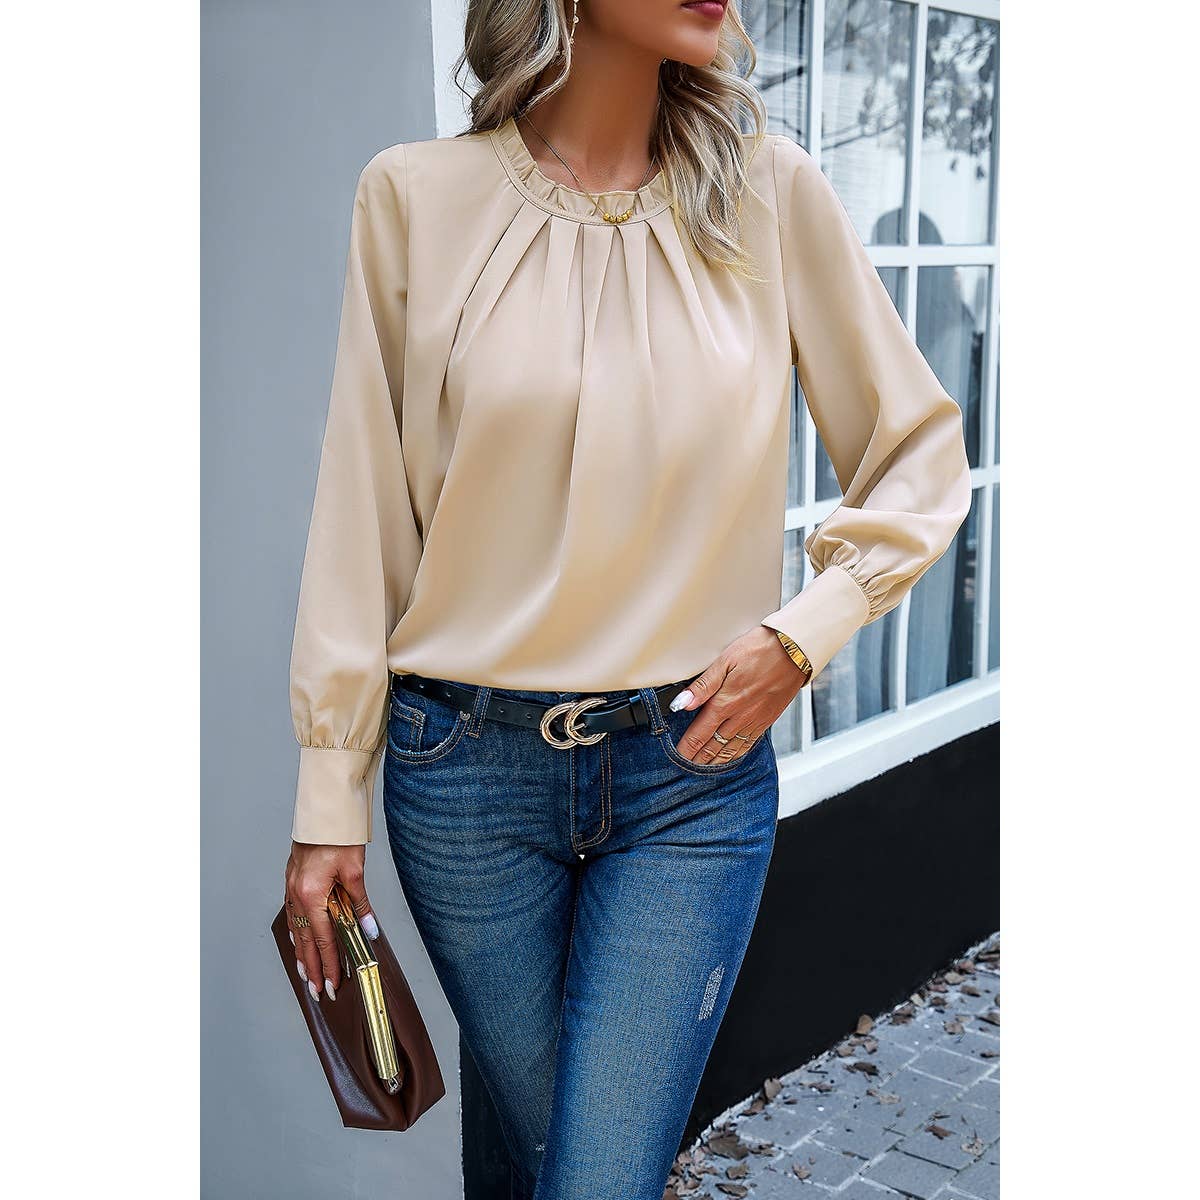 Round Neck Ruched Puff Sleeve Loose Top - MVTFASHION.COM